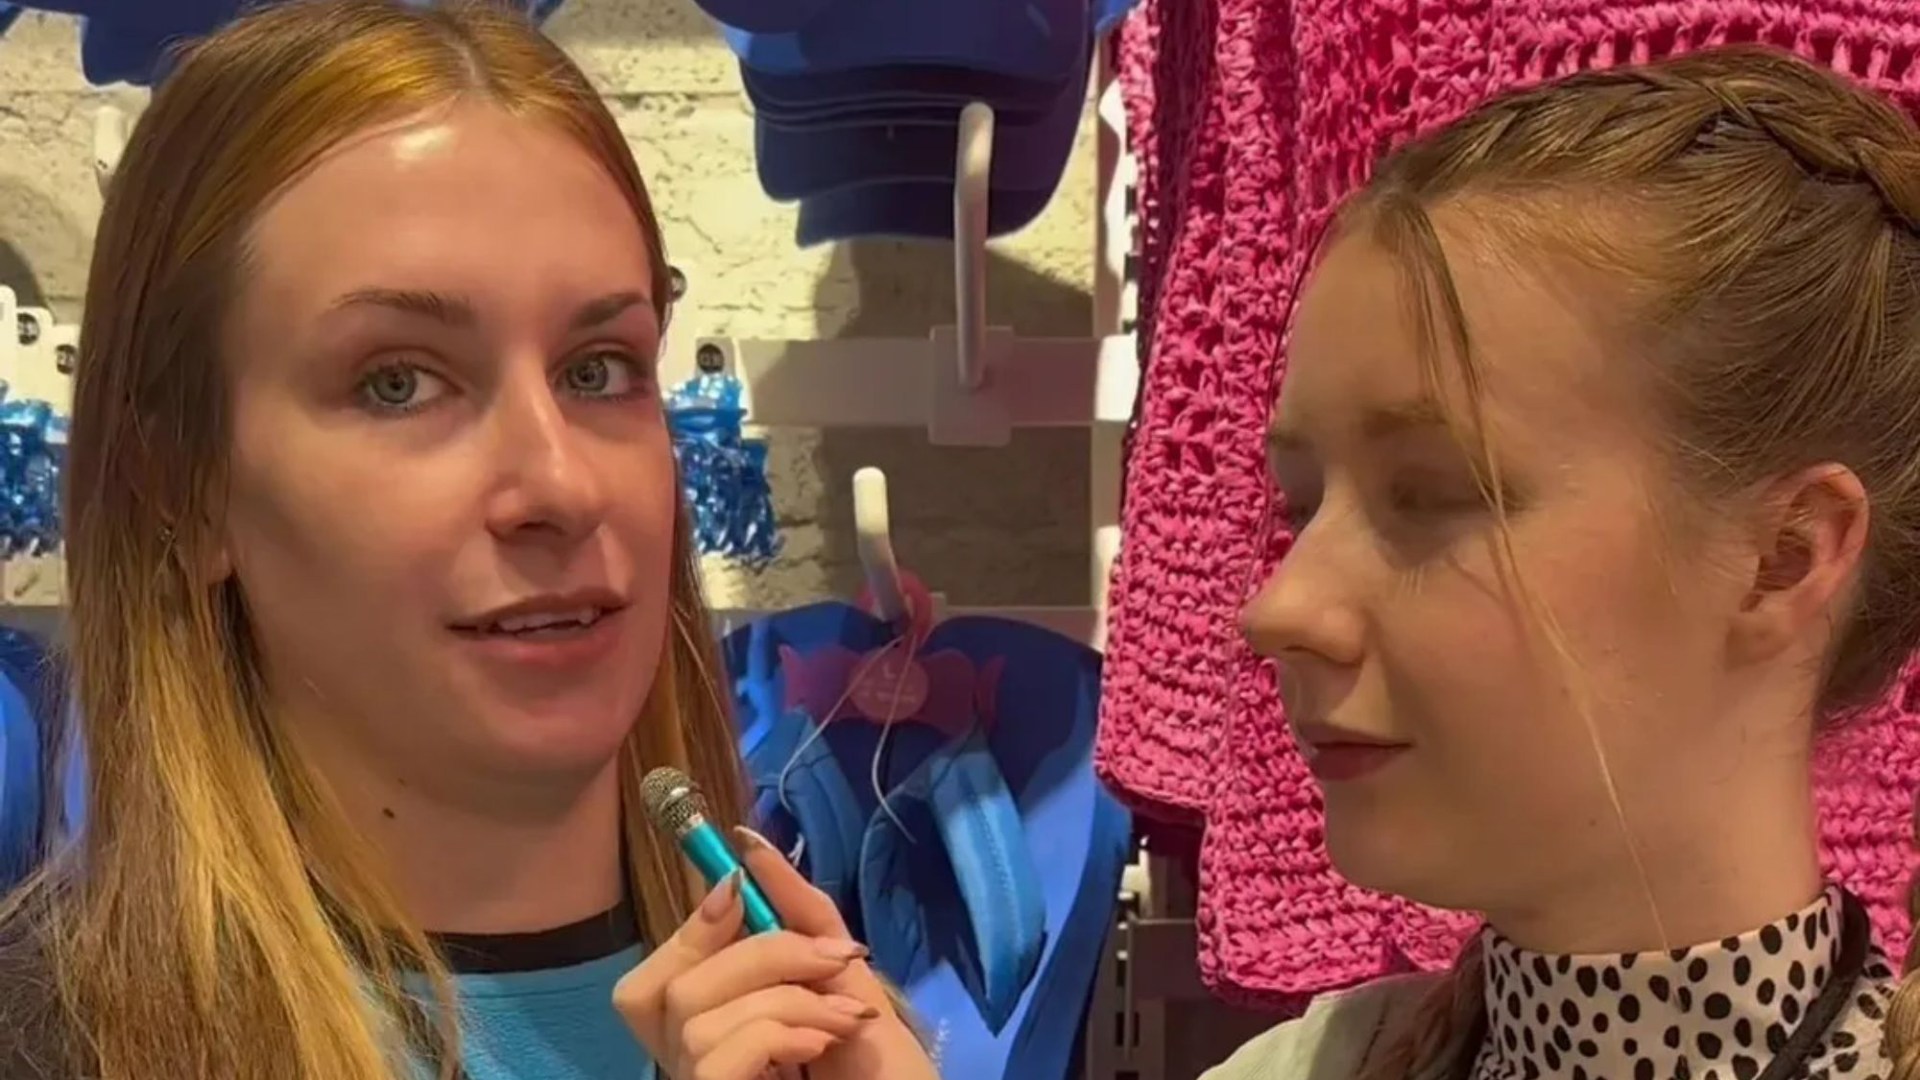 We work at Primark - six dangers lurking behind the scenes you’d NEVER think about when shopping and why we hate hangers